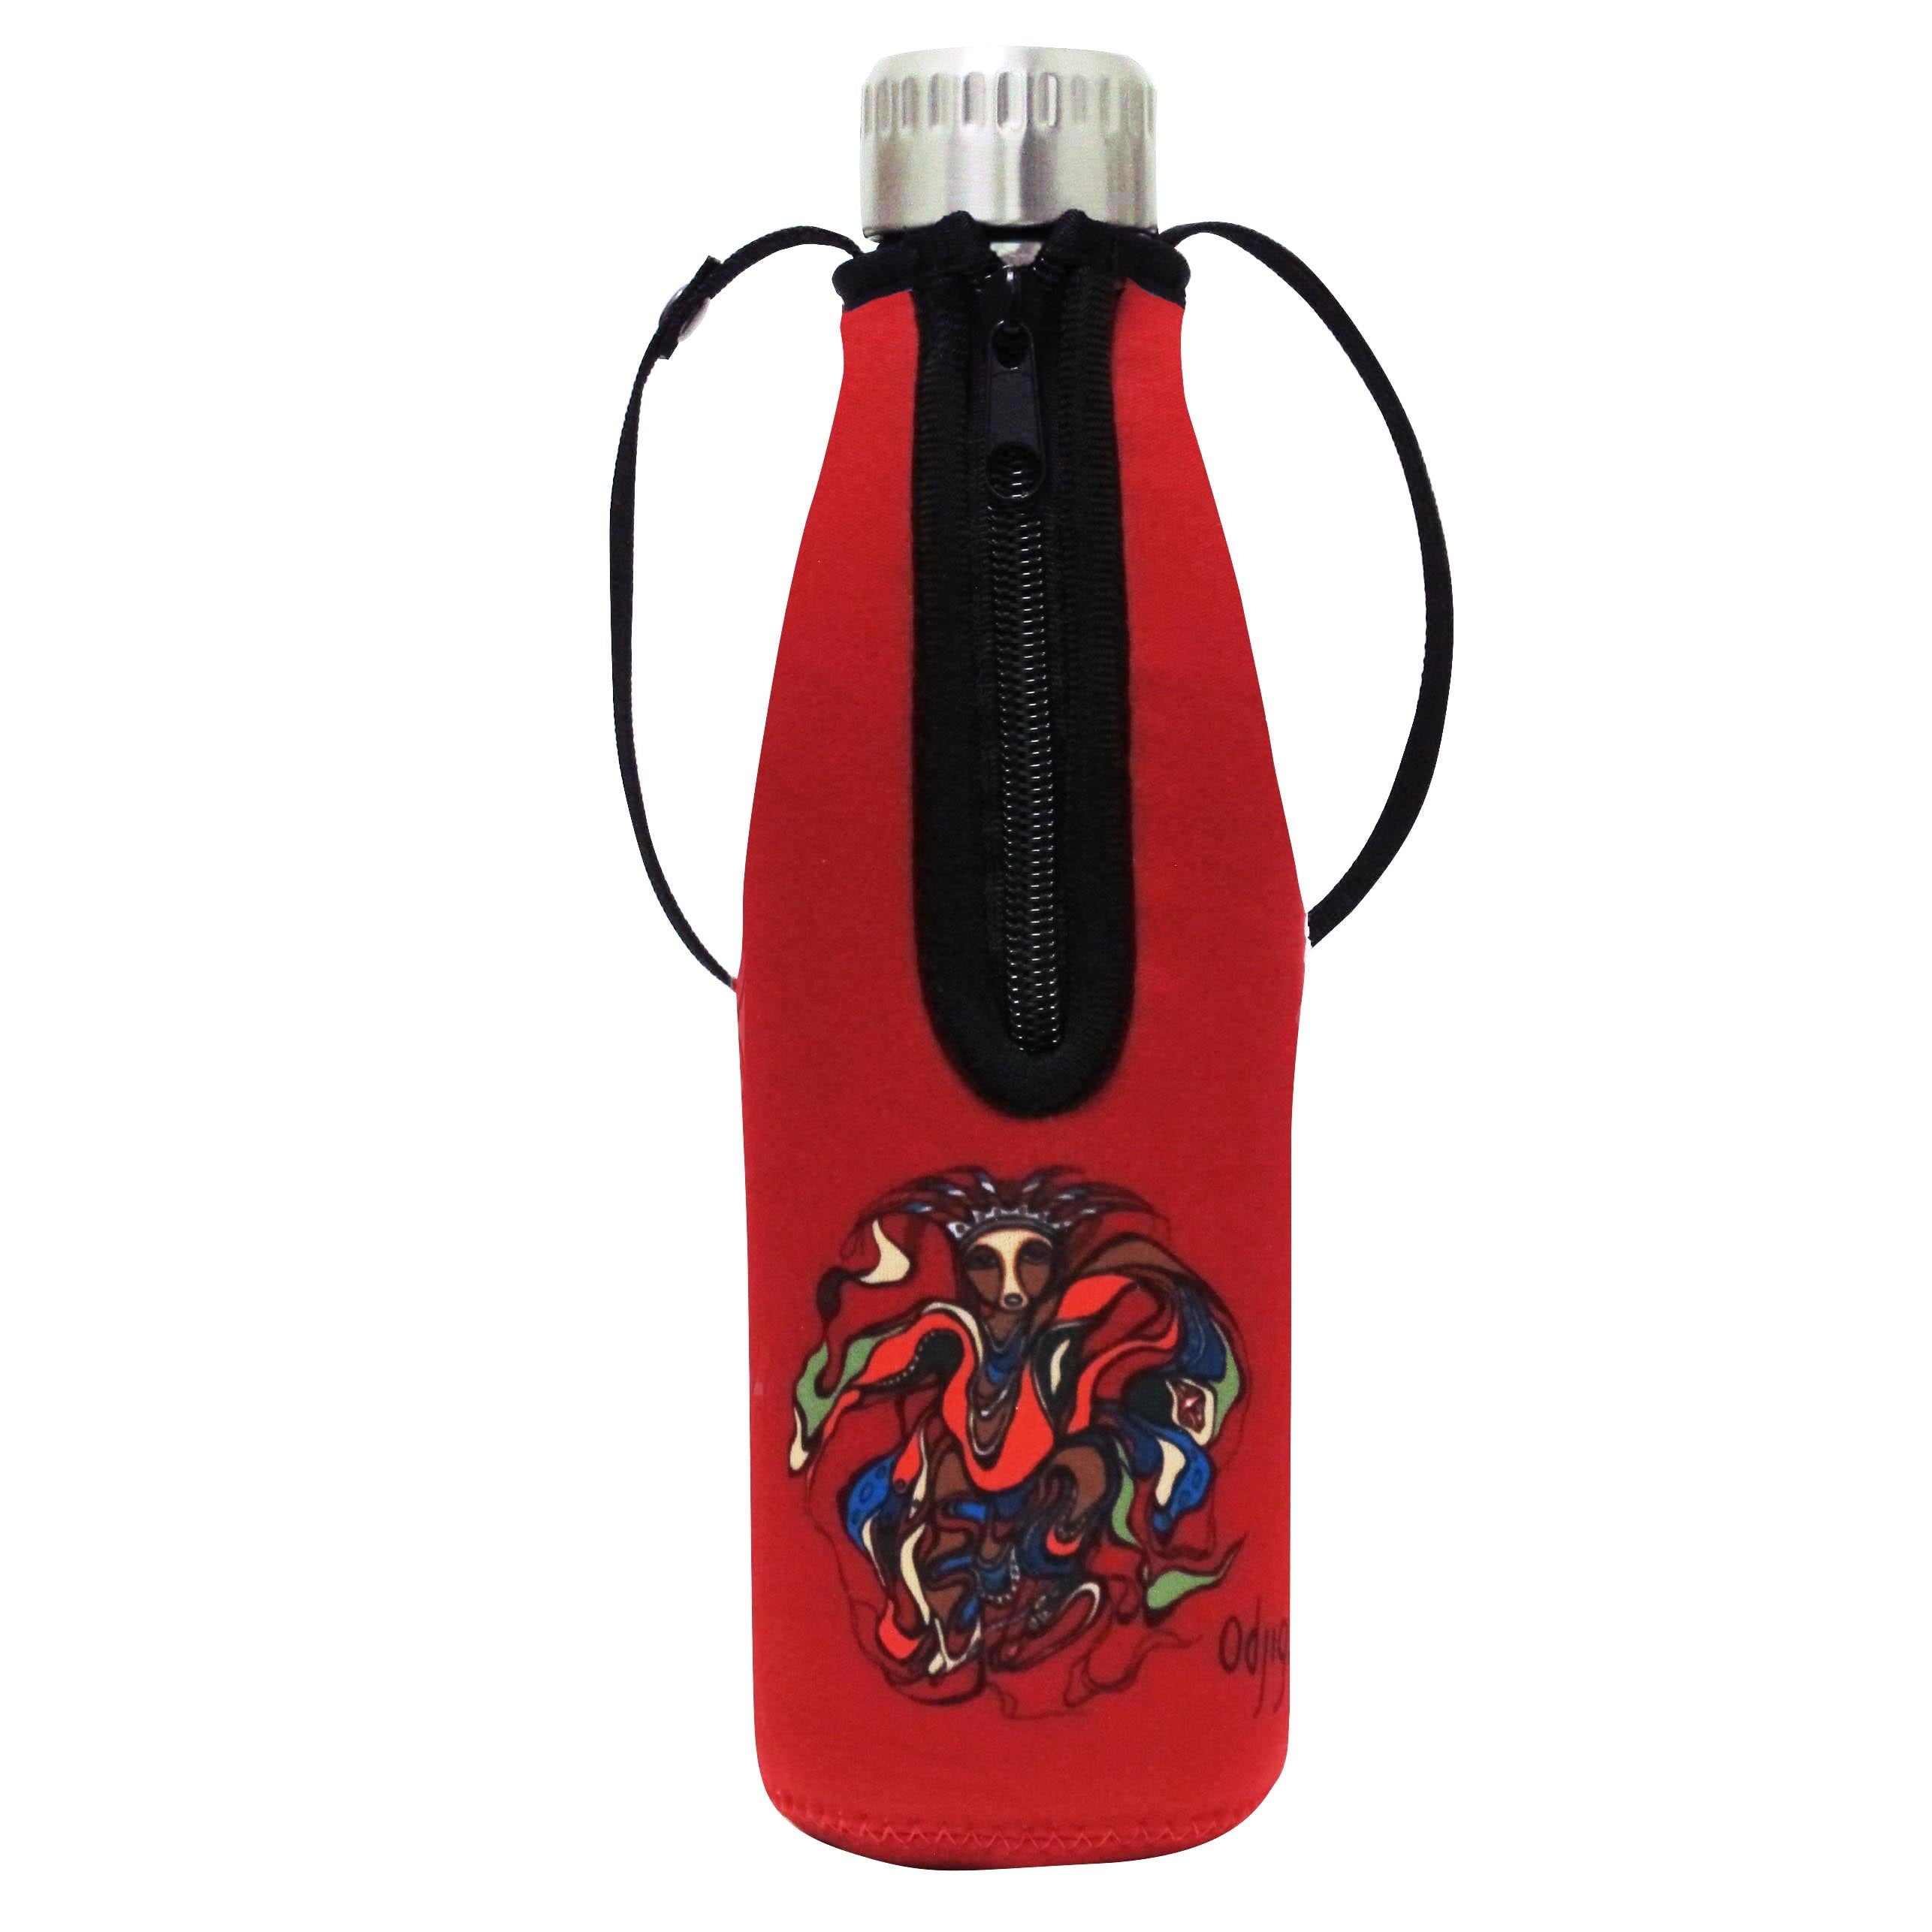 Daphne Odjig Pow Wow Dancer Water Bottle and Sleeve